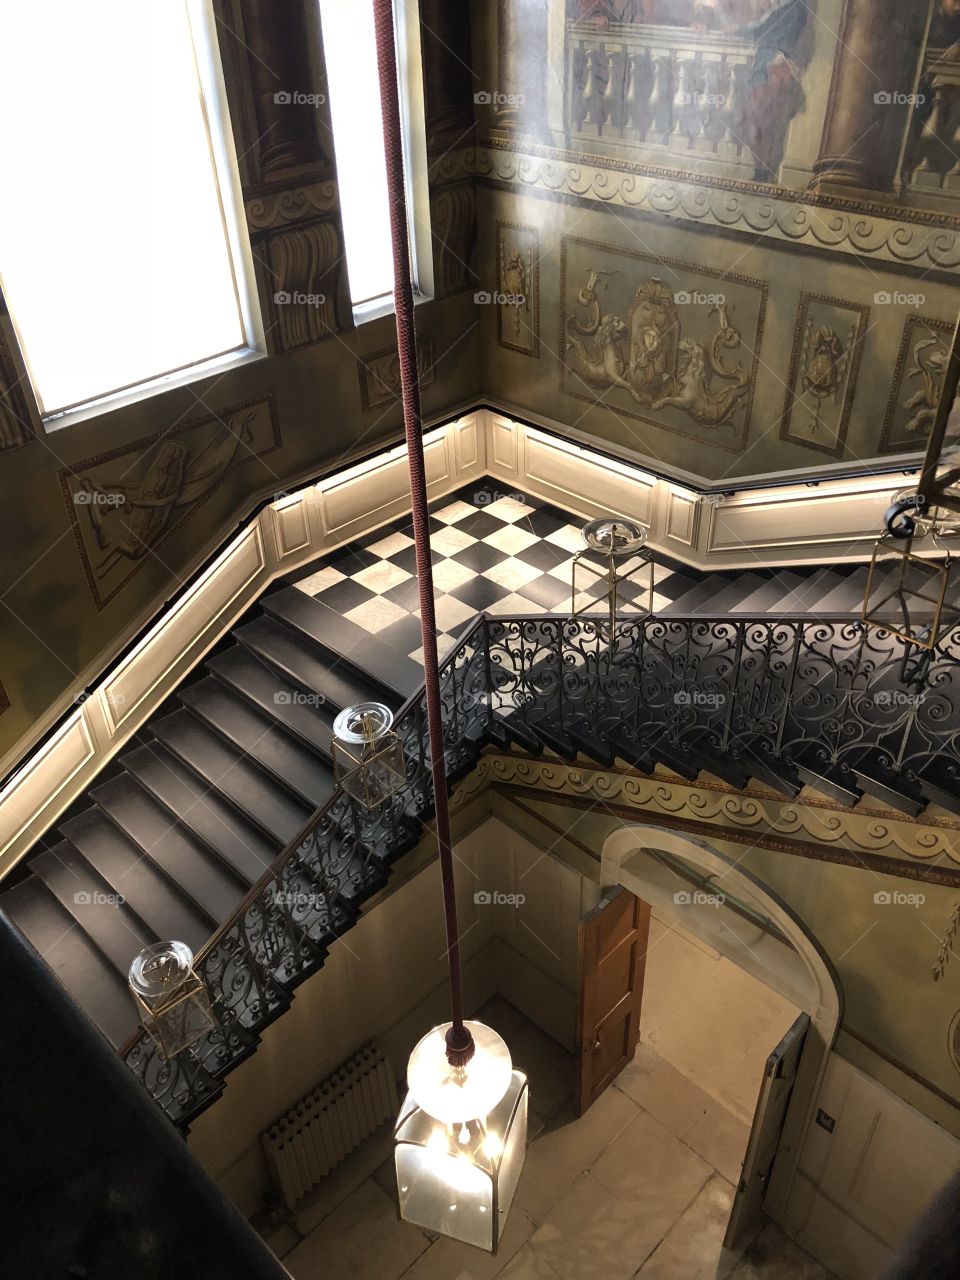 A shot view of the Royal Staircase of Kensington Palace in London, home of Princess Diana. 